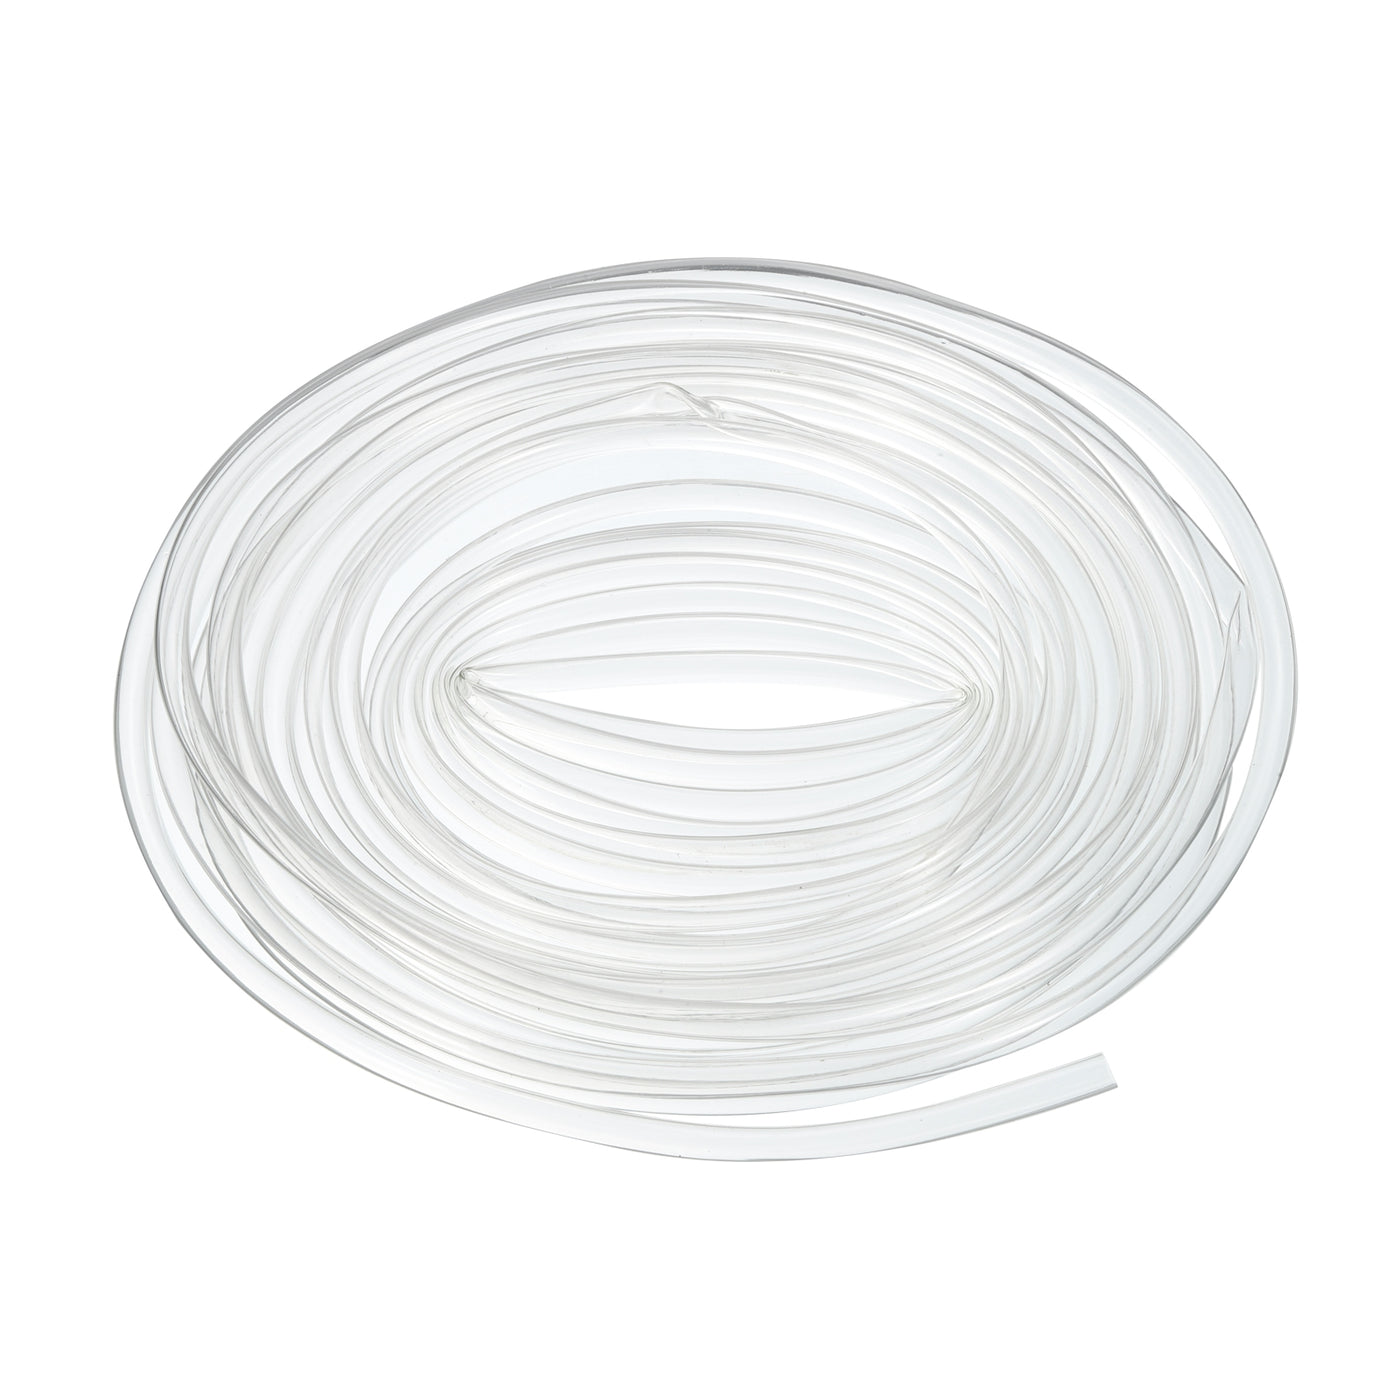 uxcell Uxcell Clear PVC Tube Wire Harness Tubing, 4mm ID 23ft Sleeve for Wire Sheathing Wire Protection